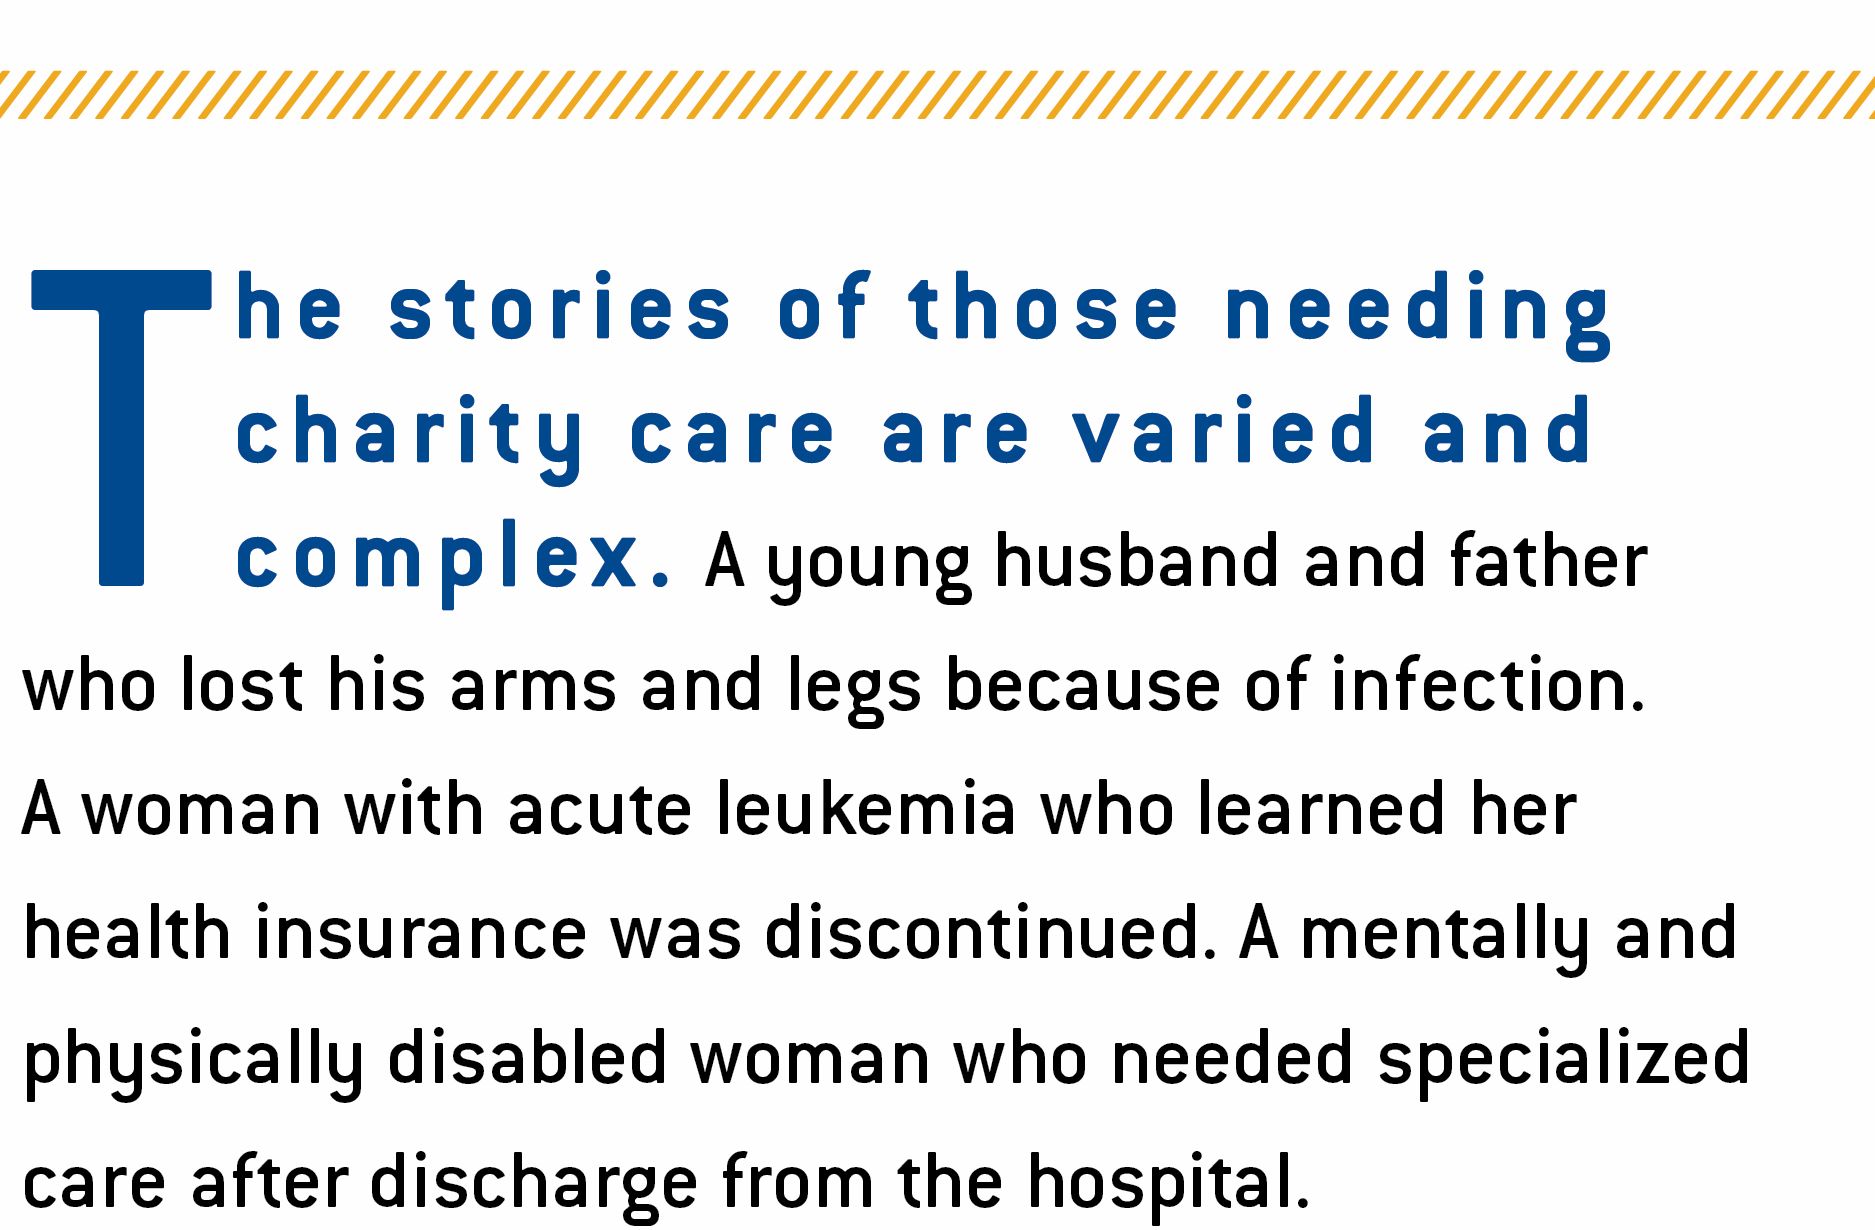 The image contains the intro text to the paragraph..."The stories of those needing charity care are varied and complex. A young husband and father who lost his arms and legs because of infection. A woman with acute leukemia who learned her health insurance was discontinued. A mentally and physically disabled woman who needed specialized care after discharge from the hospital."